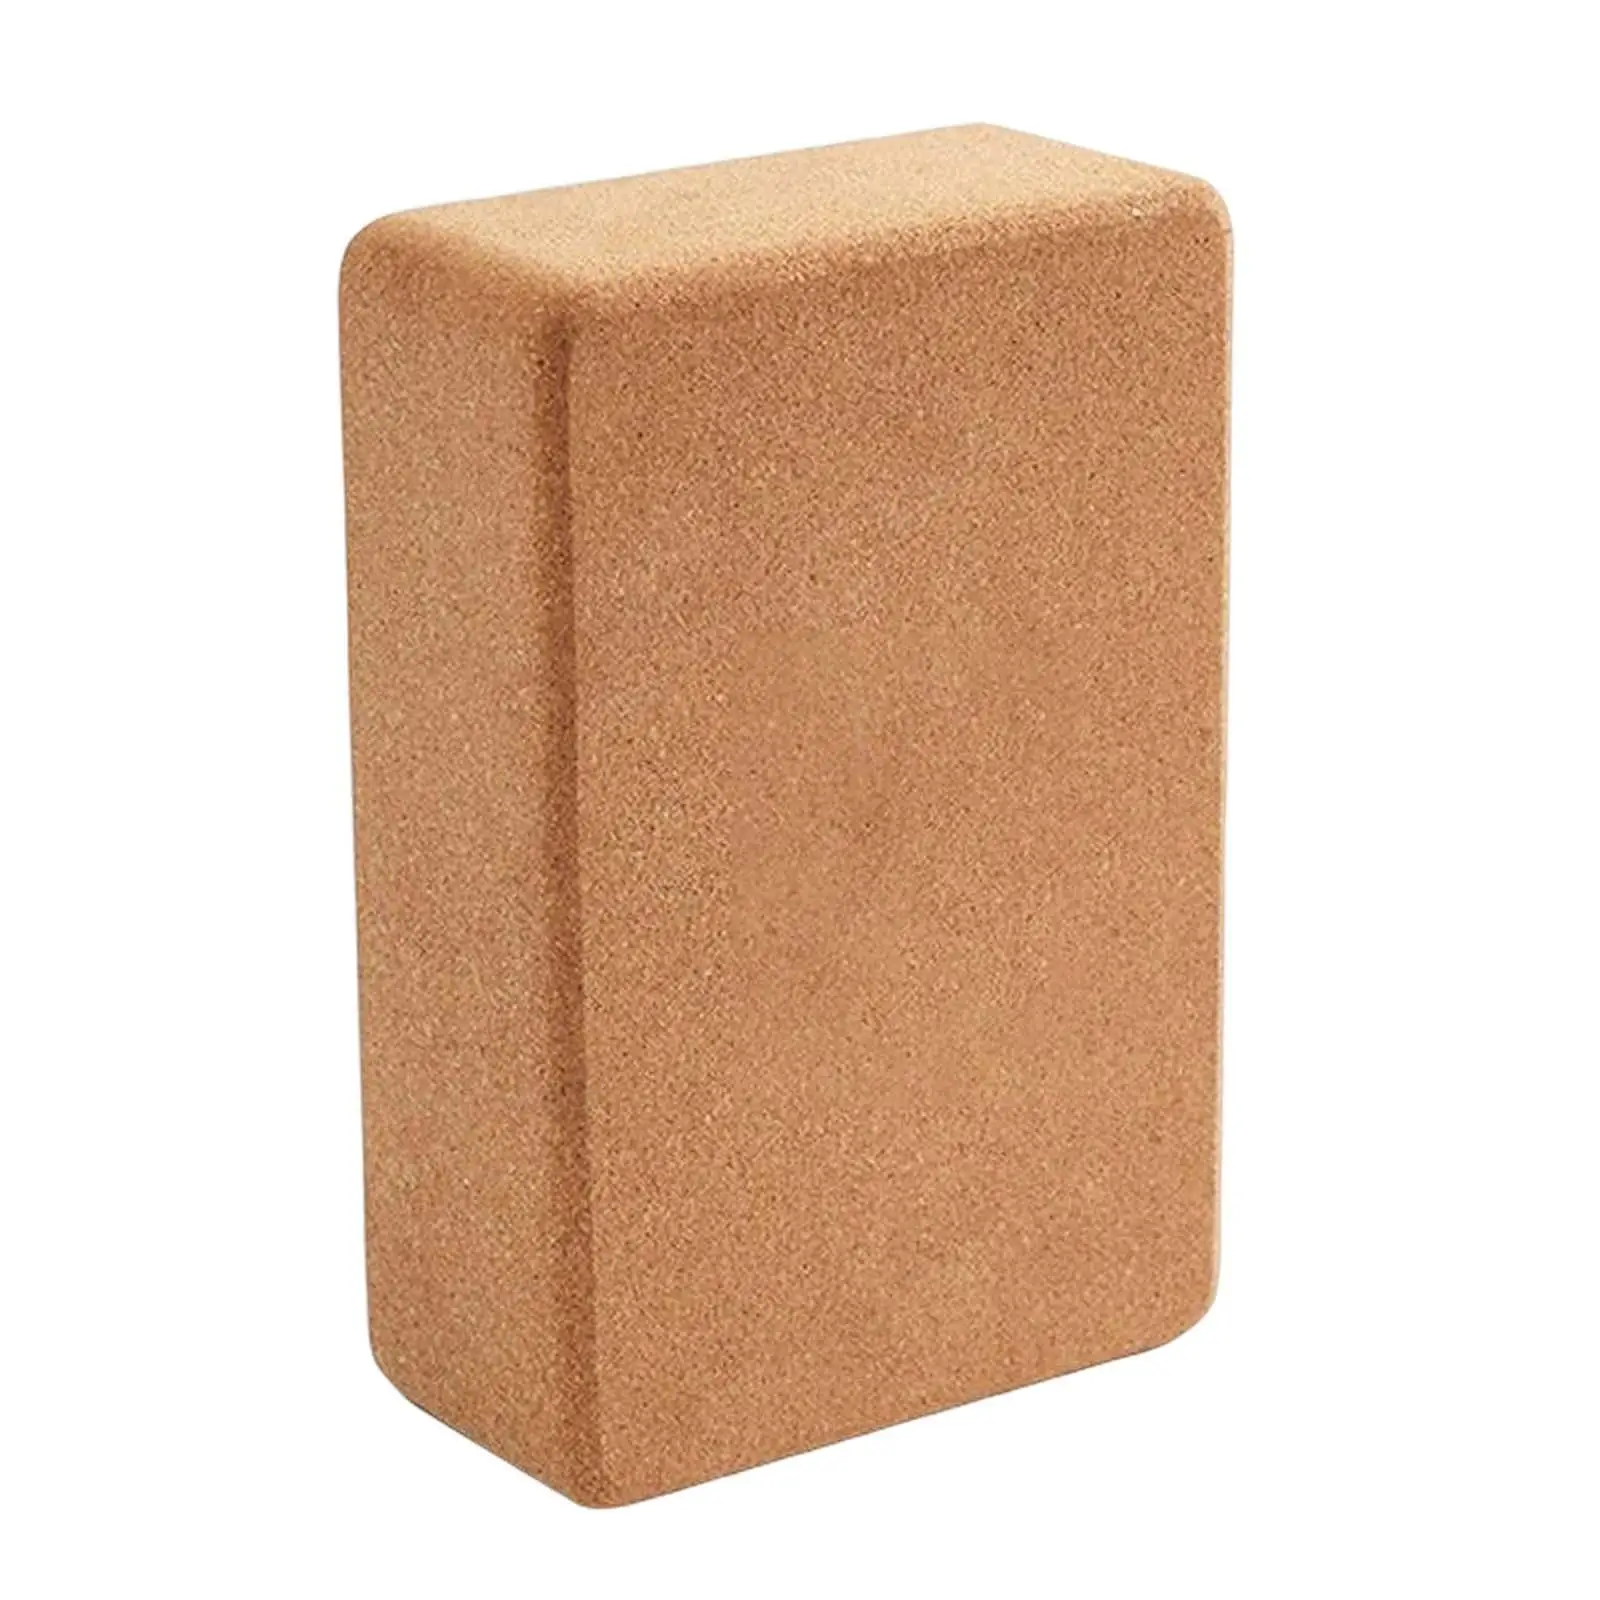 Cork Yoga Brick Squat Wedge Block Soft for Stretching Workout Indoor Sports